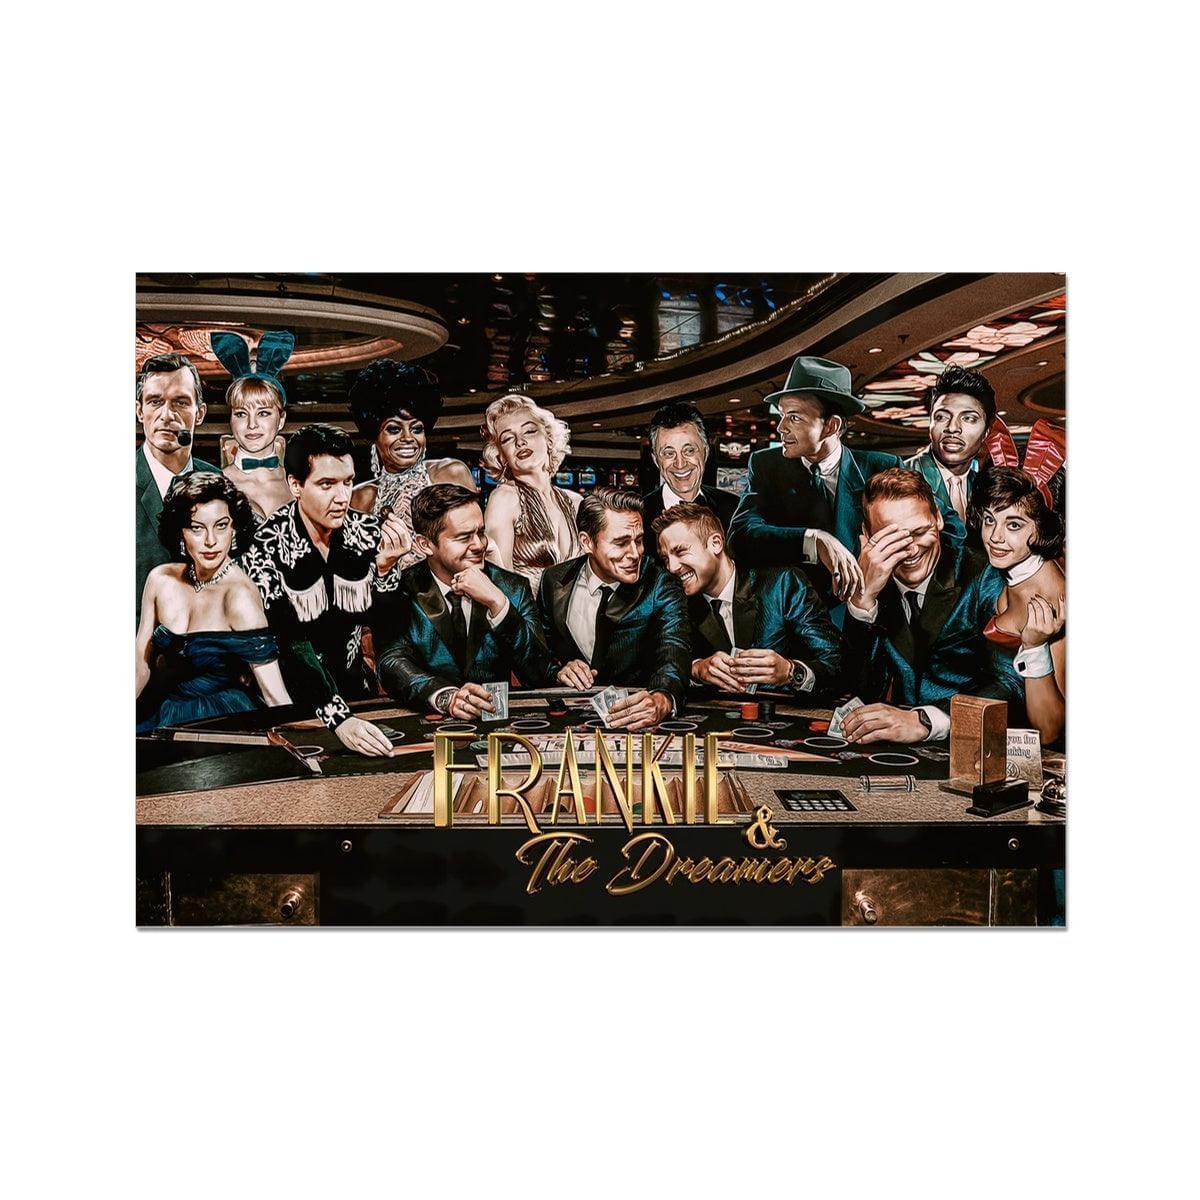 Frankie And The Dreamers Casino 2 Wall Art Poster | Art Prints A2 Landscape